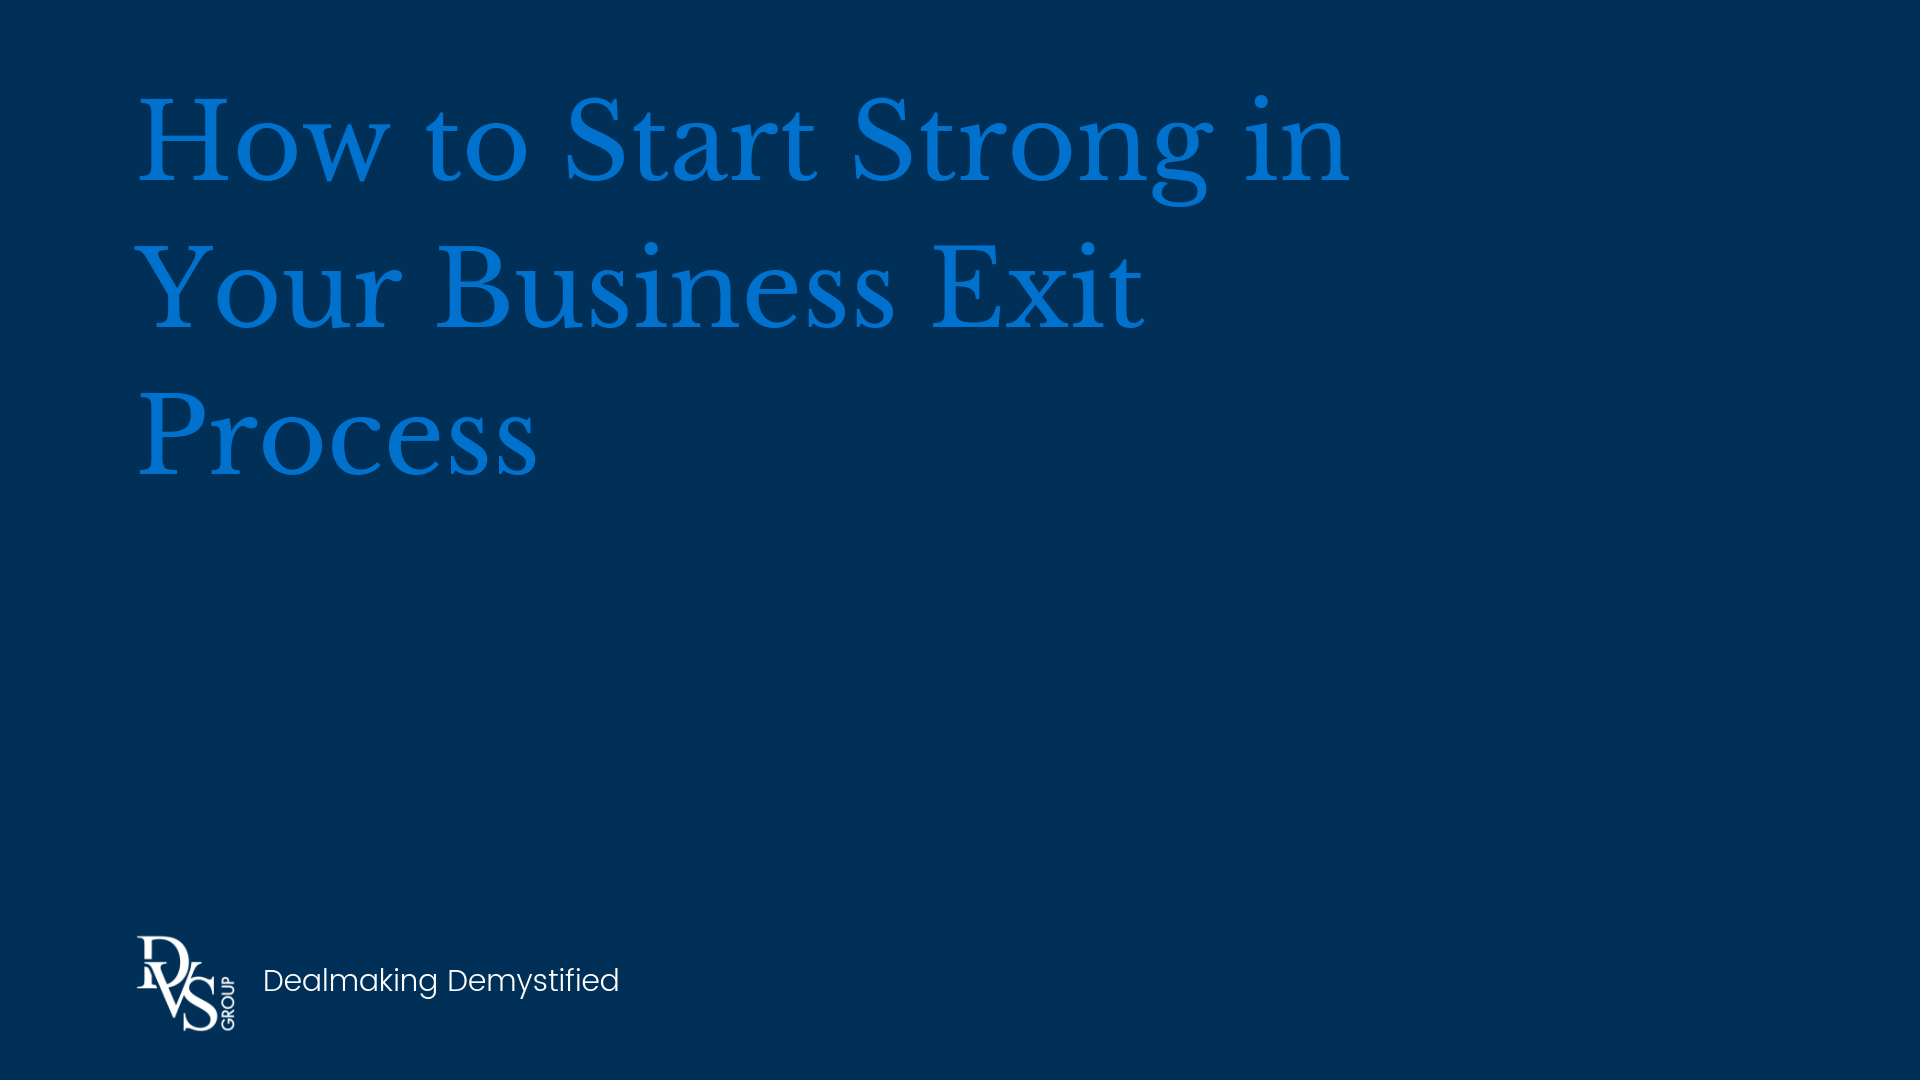 How to Start Strong in Your Business Exit Process